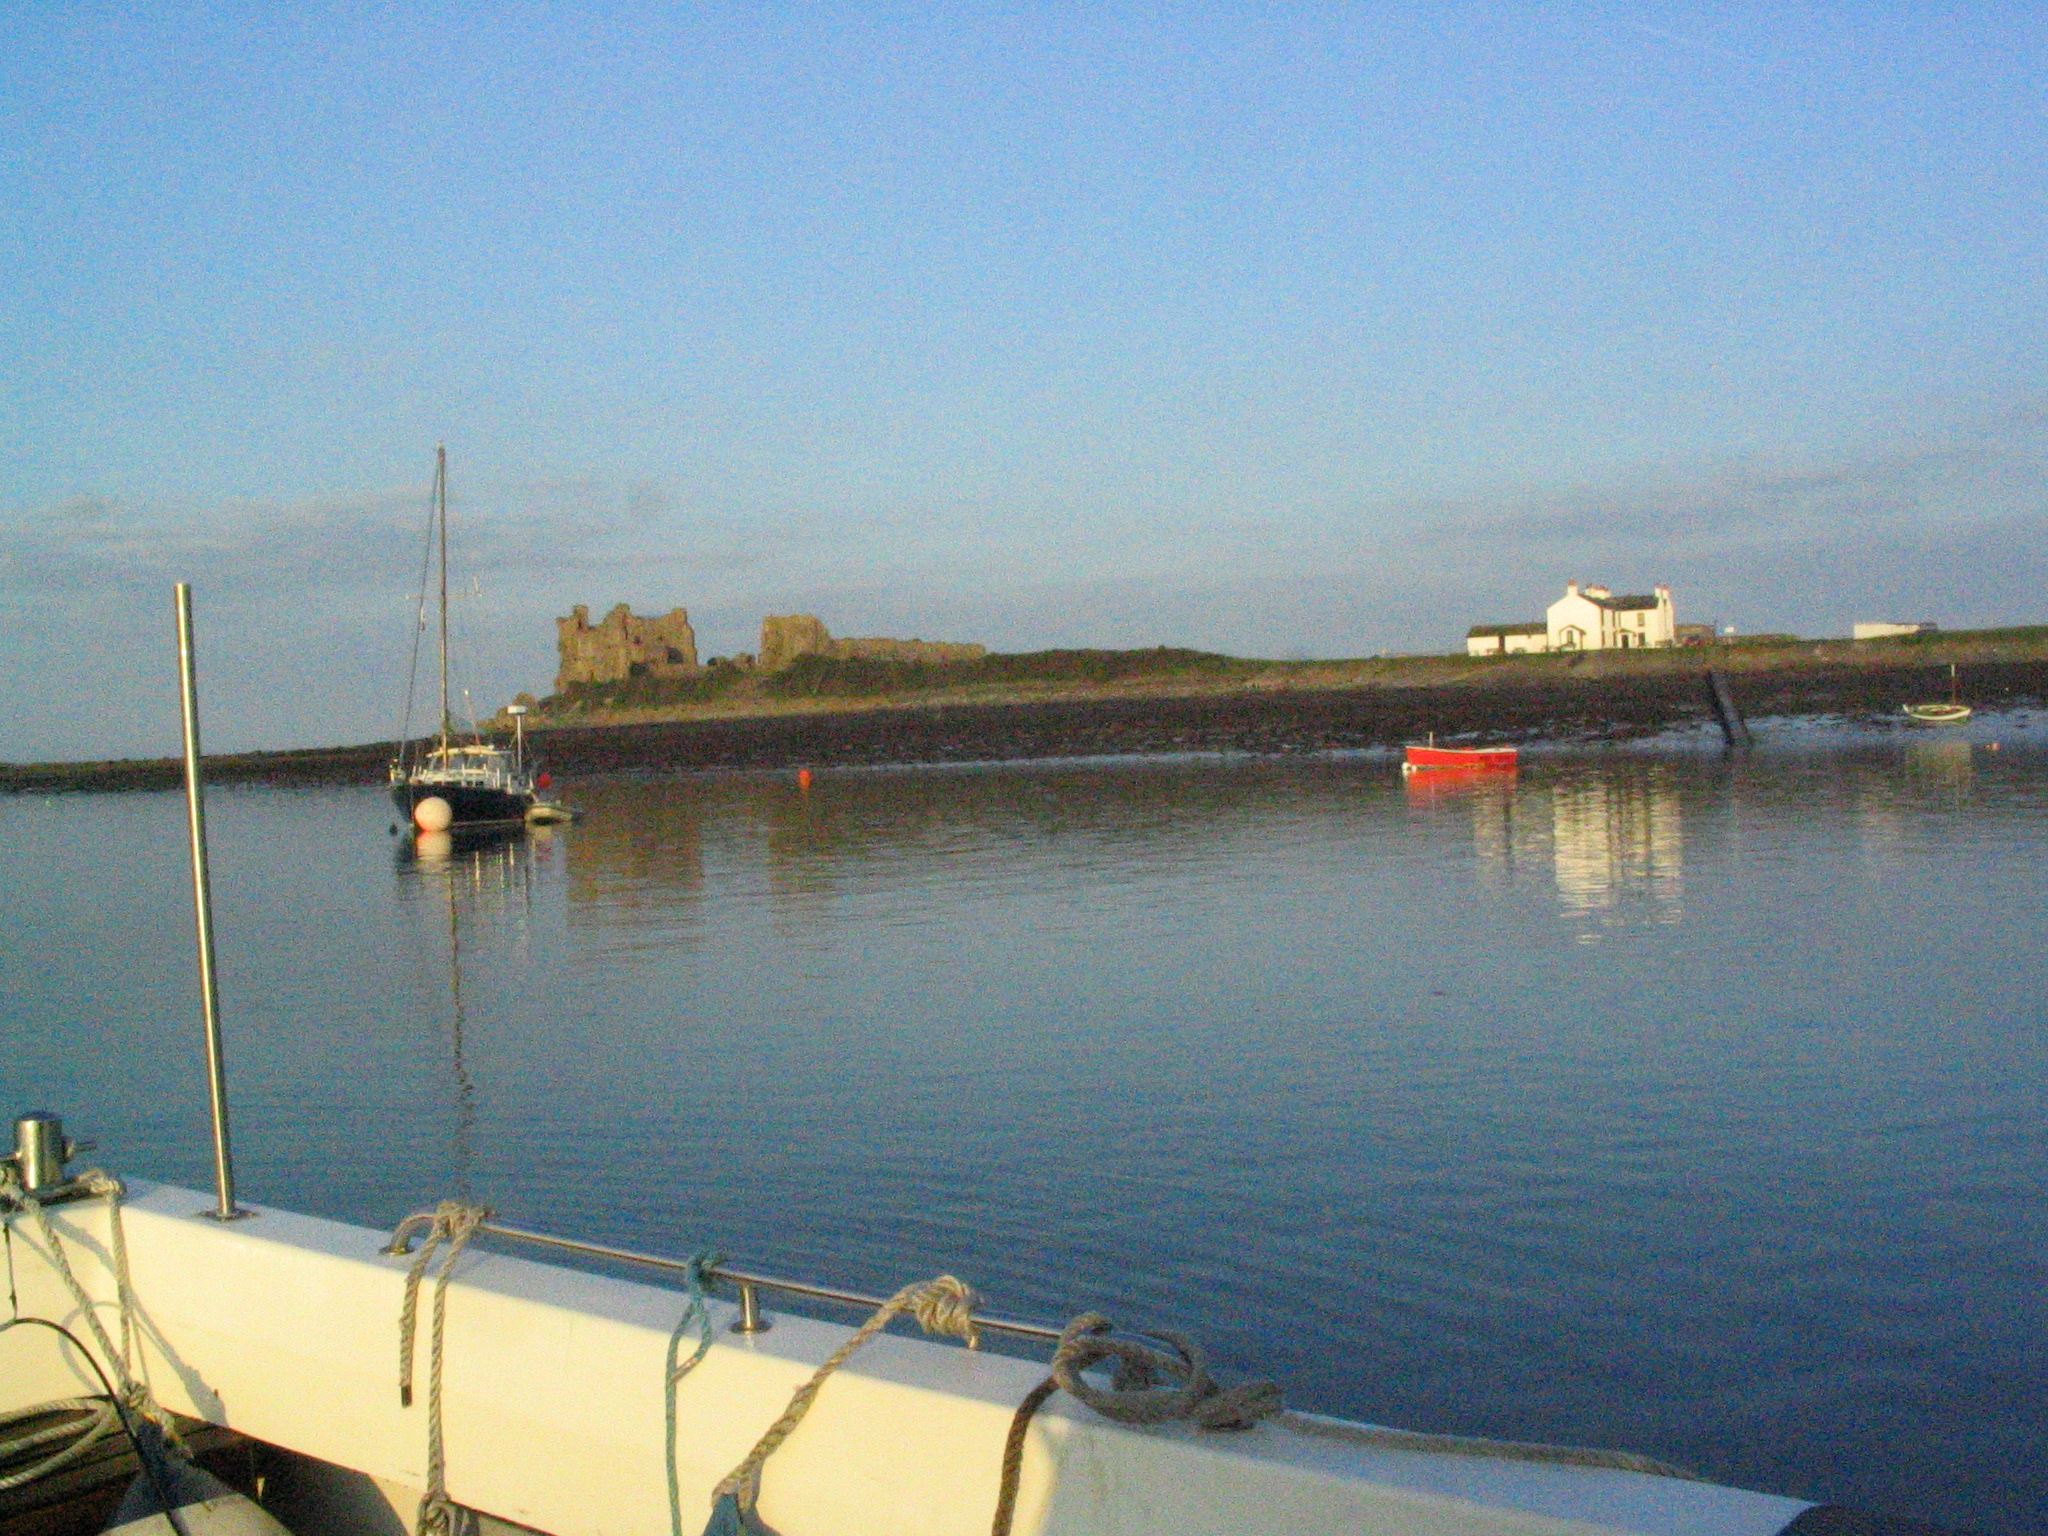 Piel Castle and pub from the moorings
in the morning